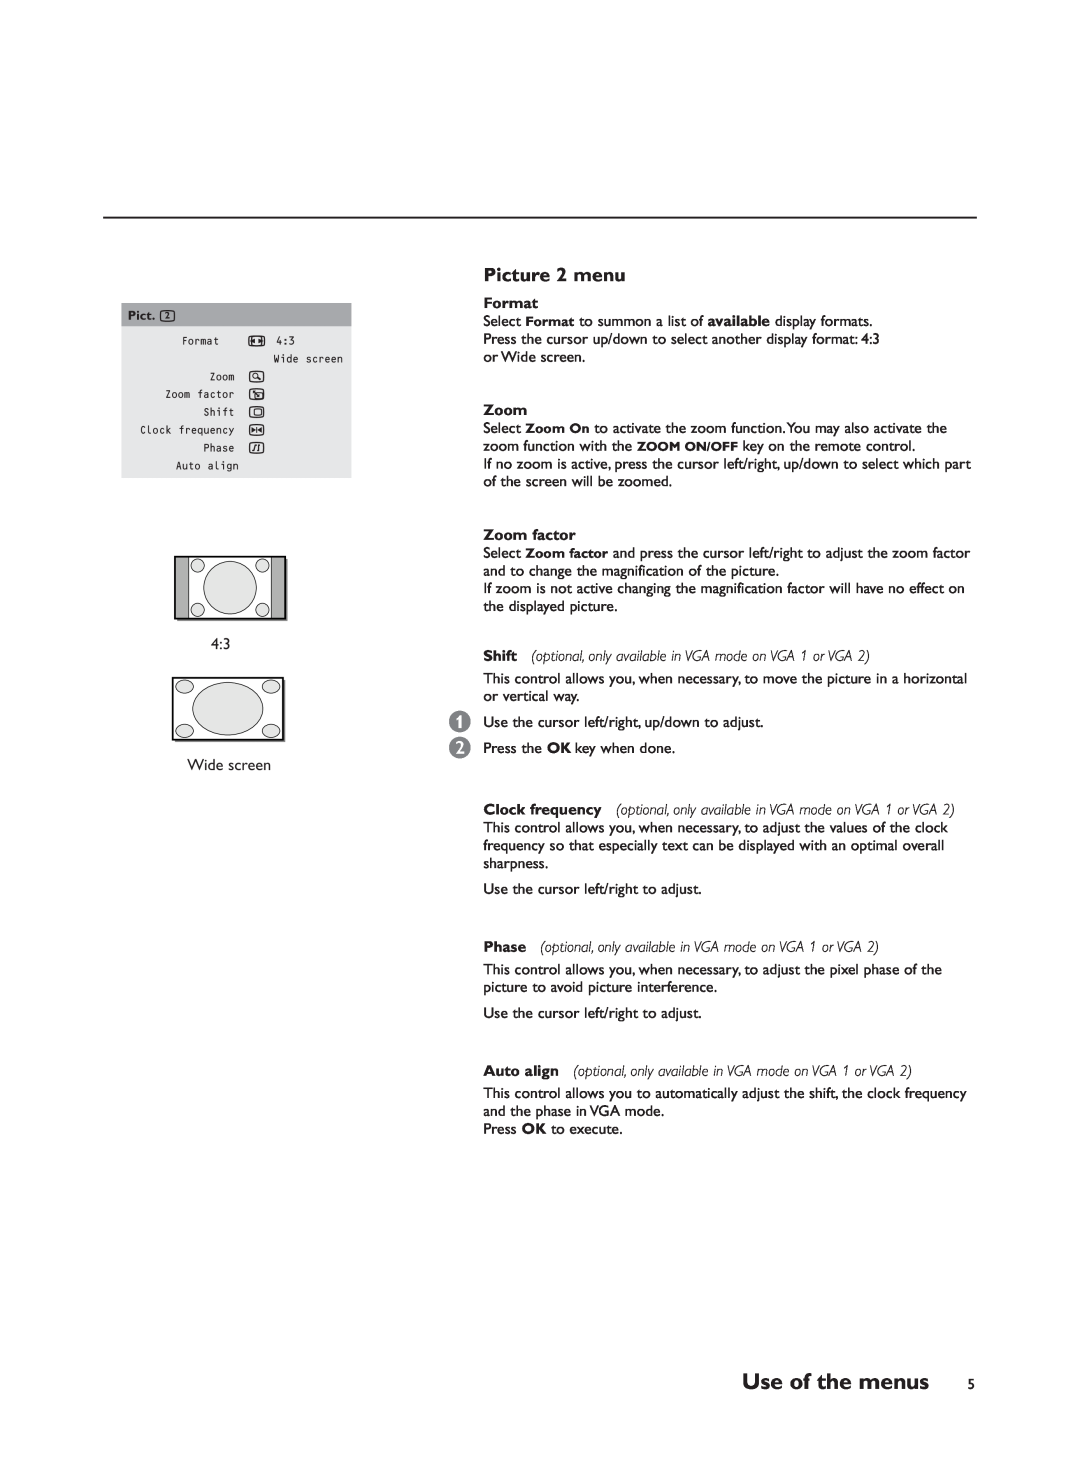 Philips RS232 manual Use of the menus, Picture 2 menu, Shift optional, only available in VGA mode on VGA 1 or VGA 